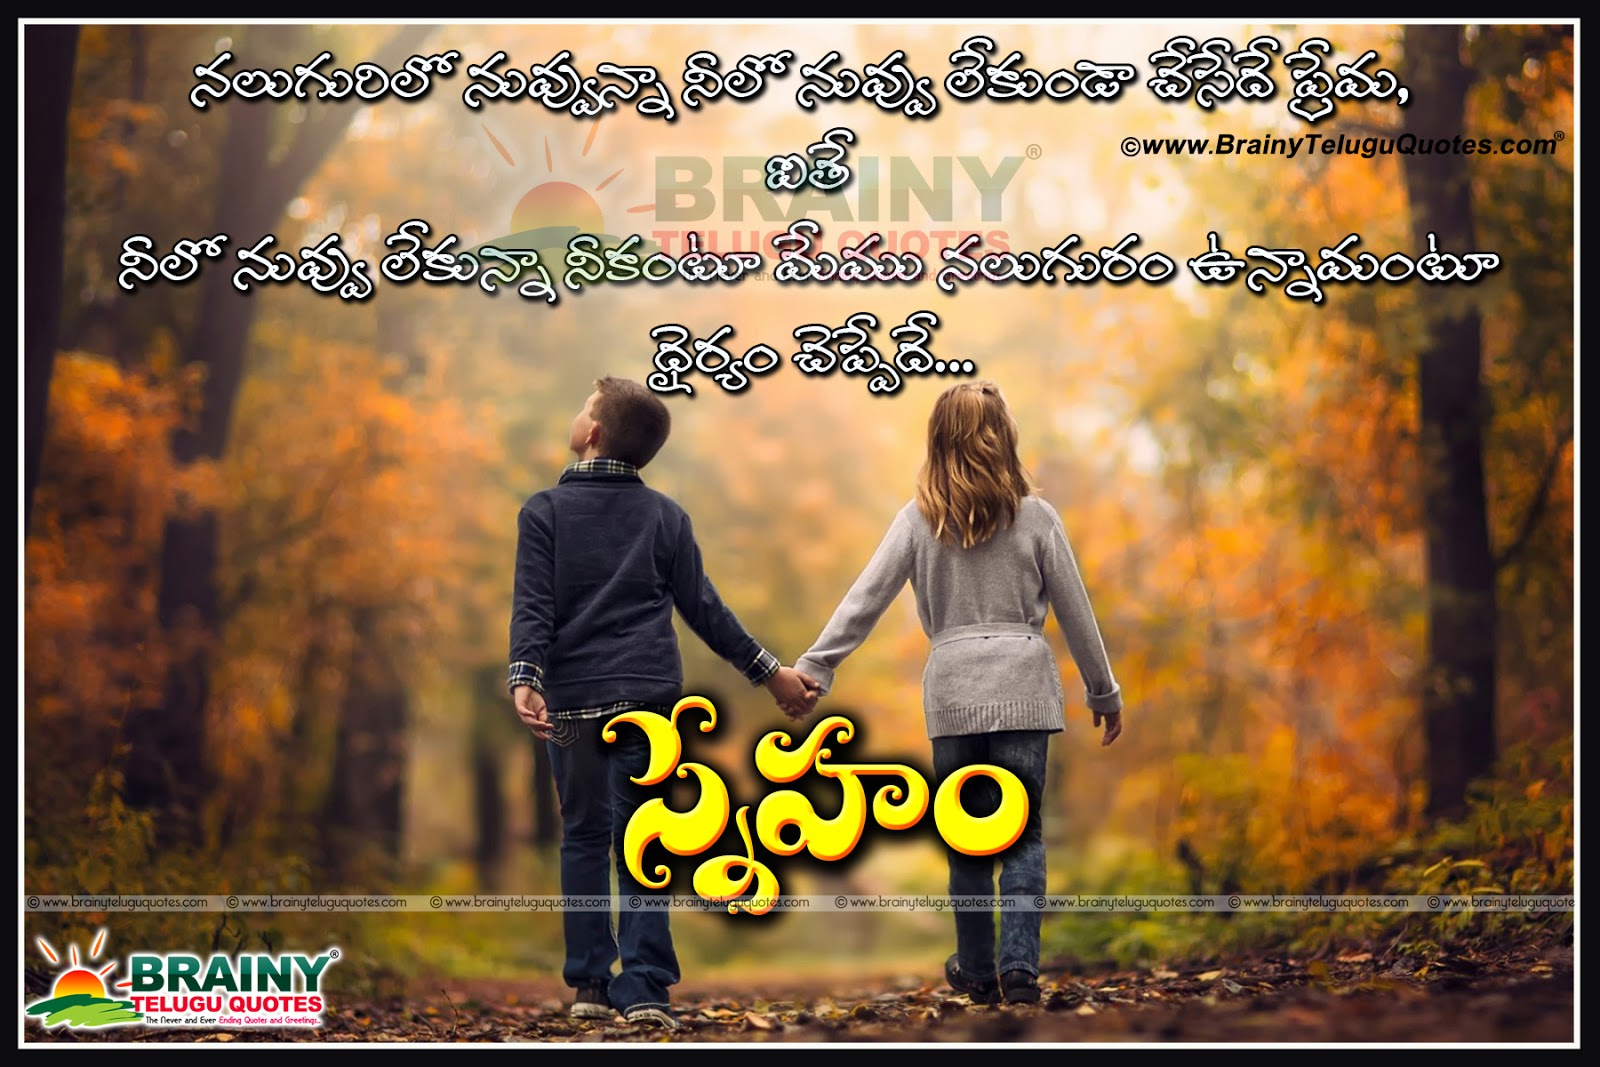 Beautiful Telugu Friendship Messages with Pictures | BrainyTeluguQuotes